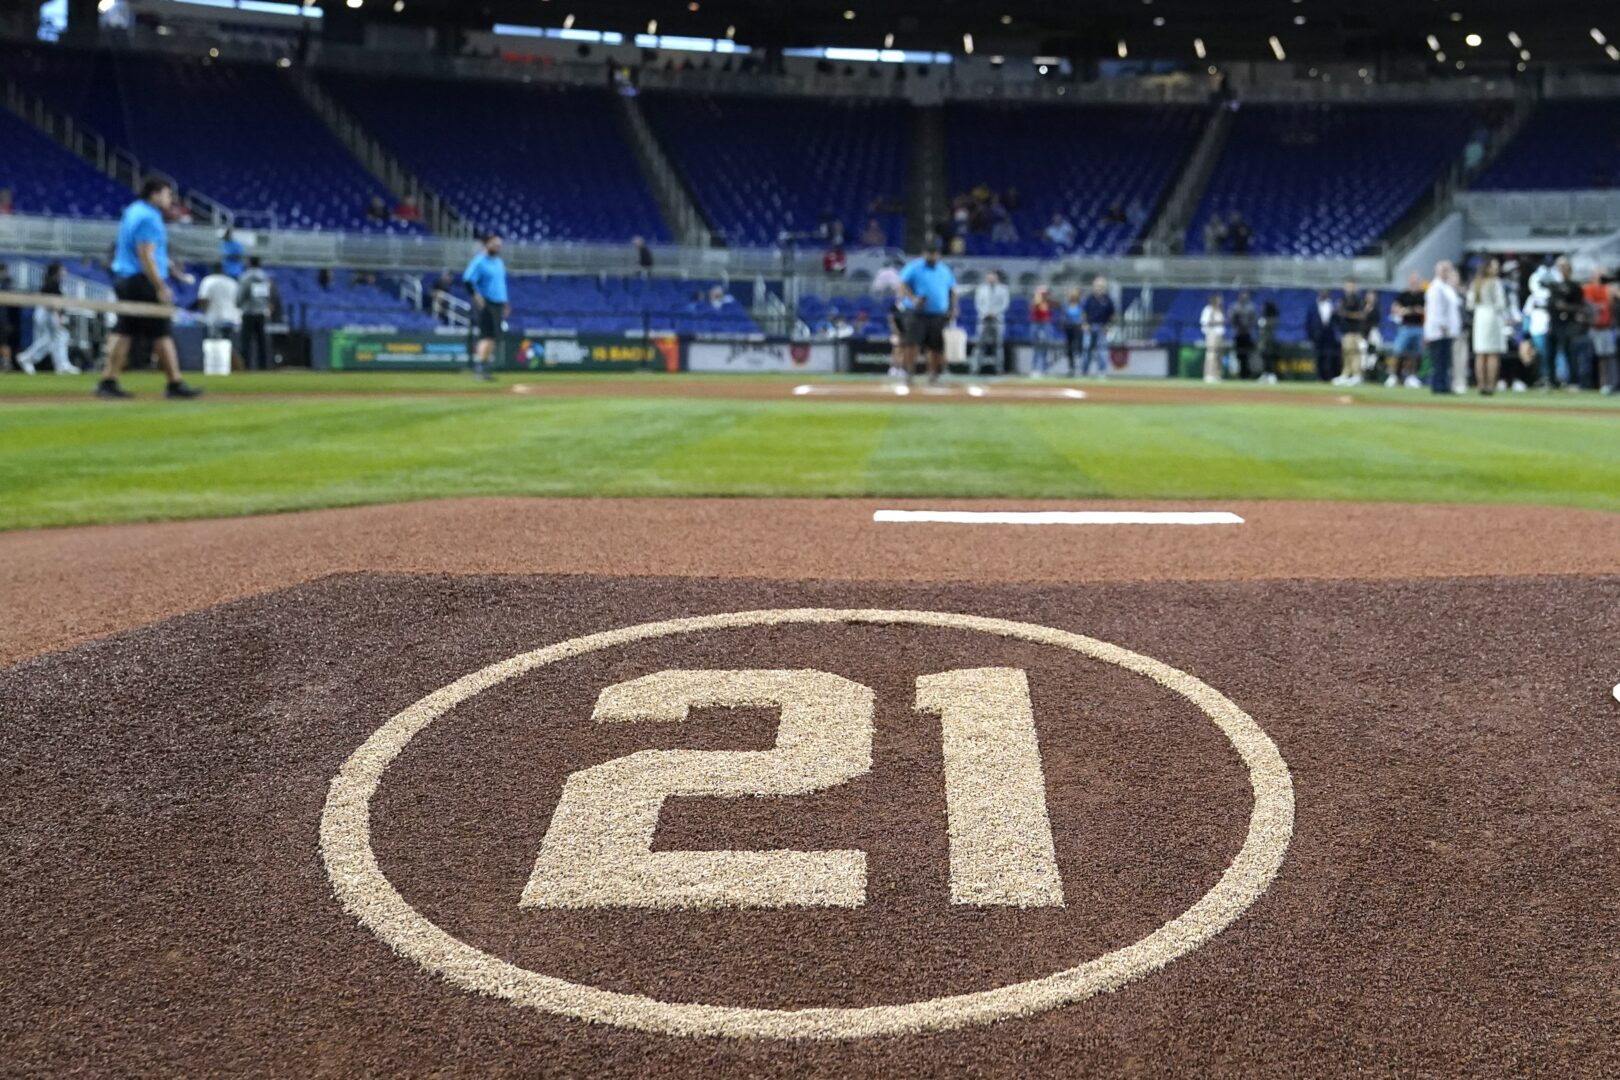 The No. 21 is on the pitching mound in honor of Roberto Clemente Day before a baseball game between the Miami Marlins and the Philadelphia Phillies, Thursday, Sept. 15, 2022, in Miami.